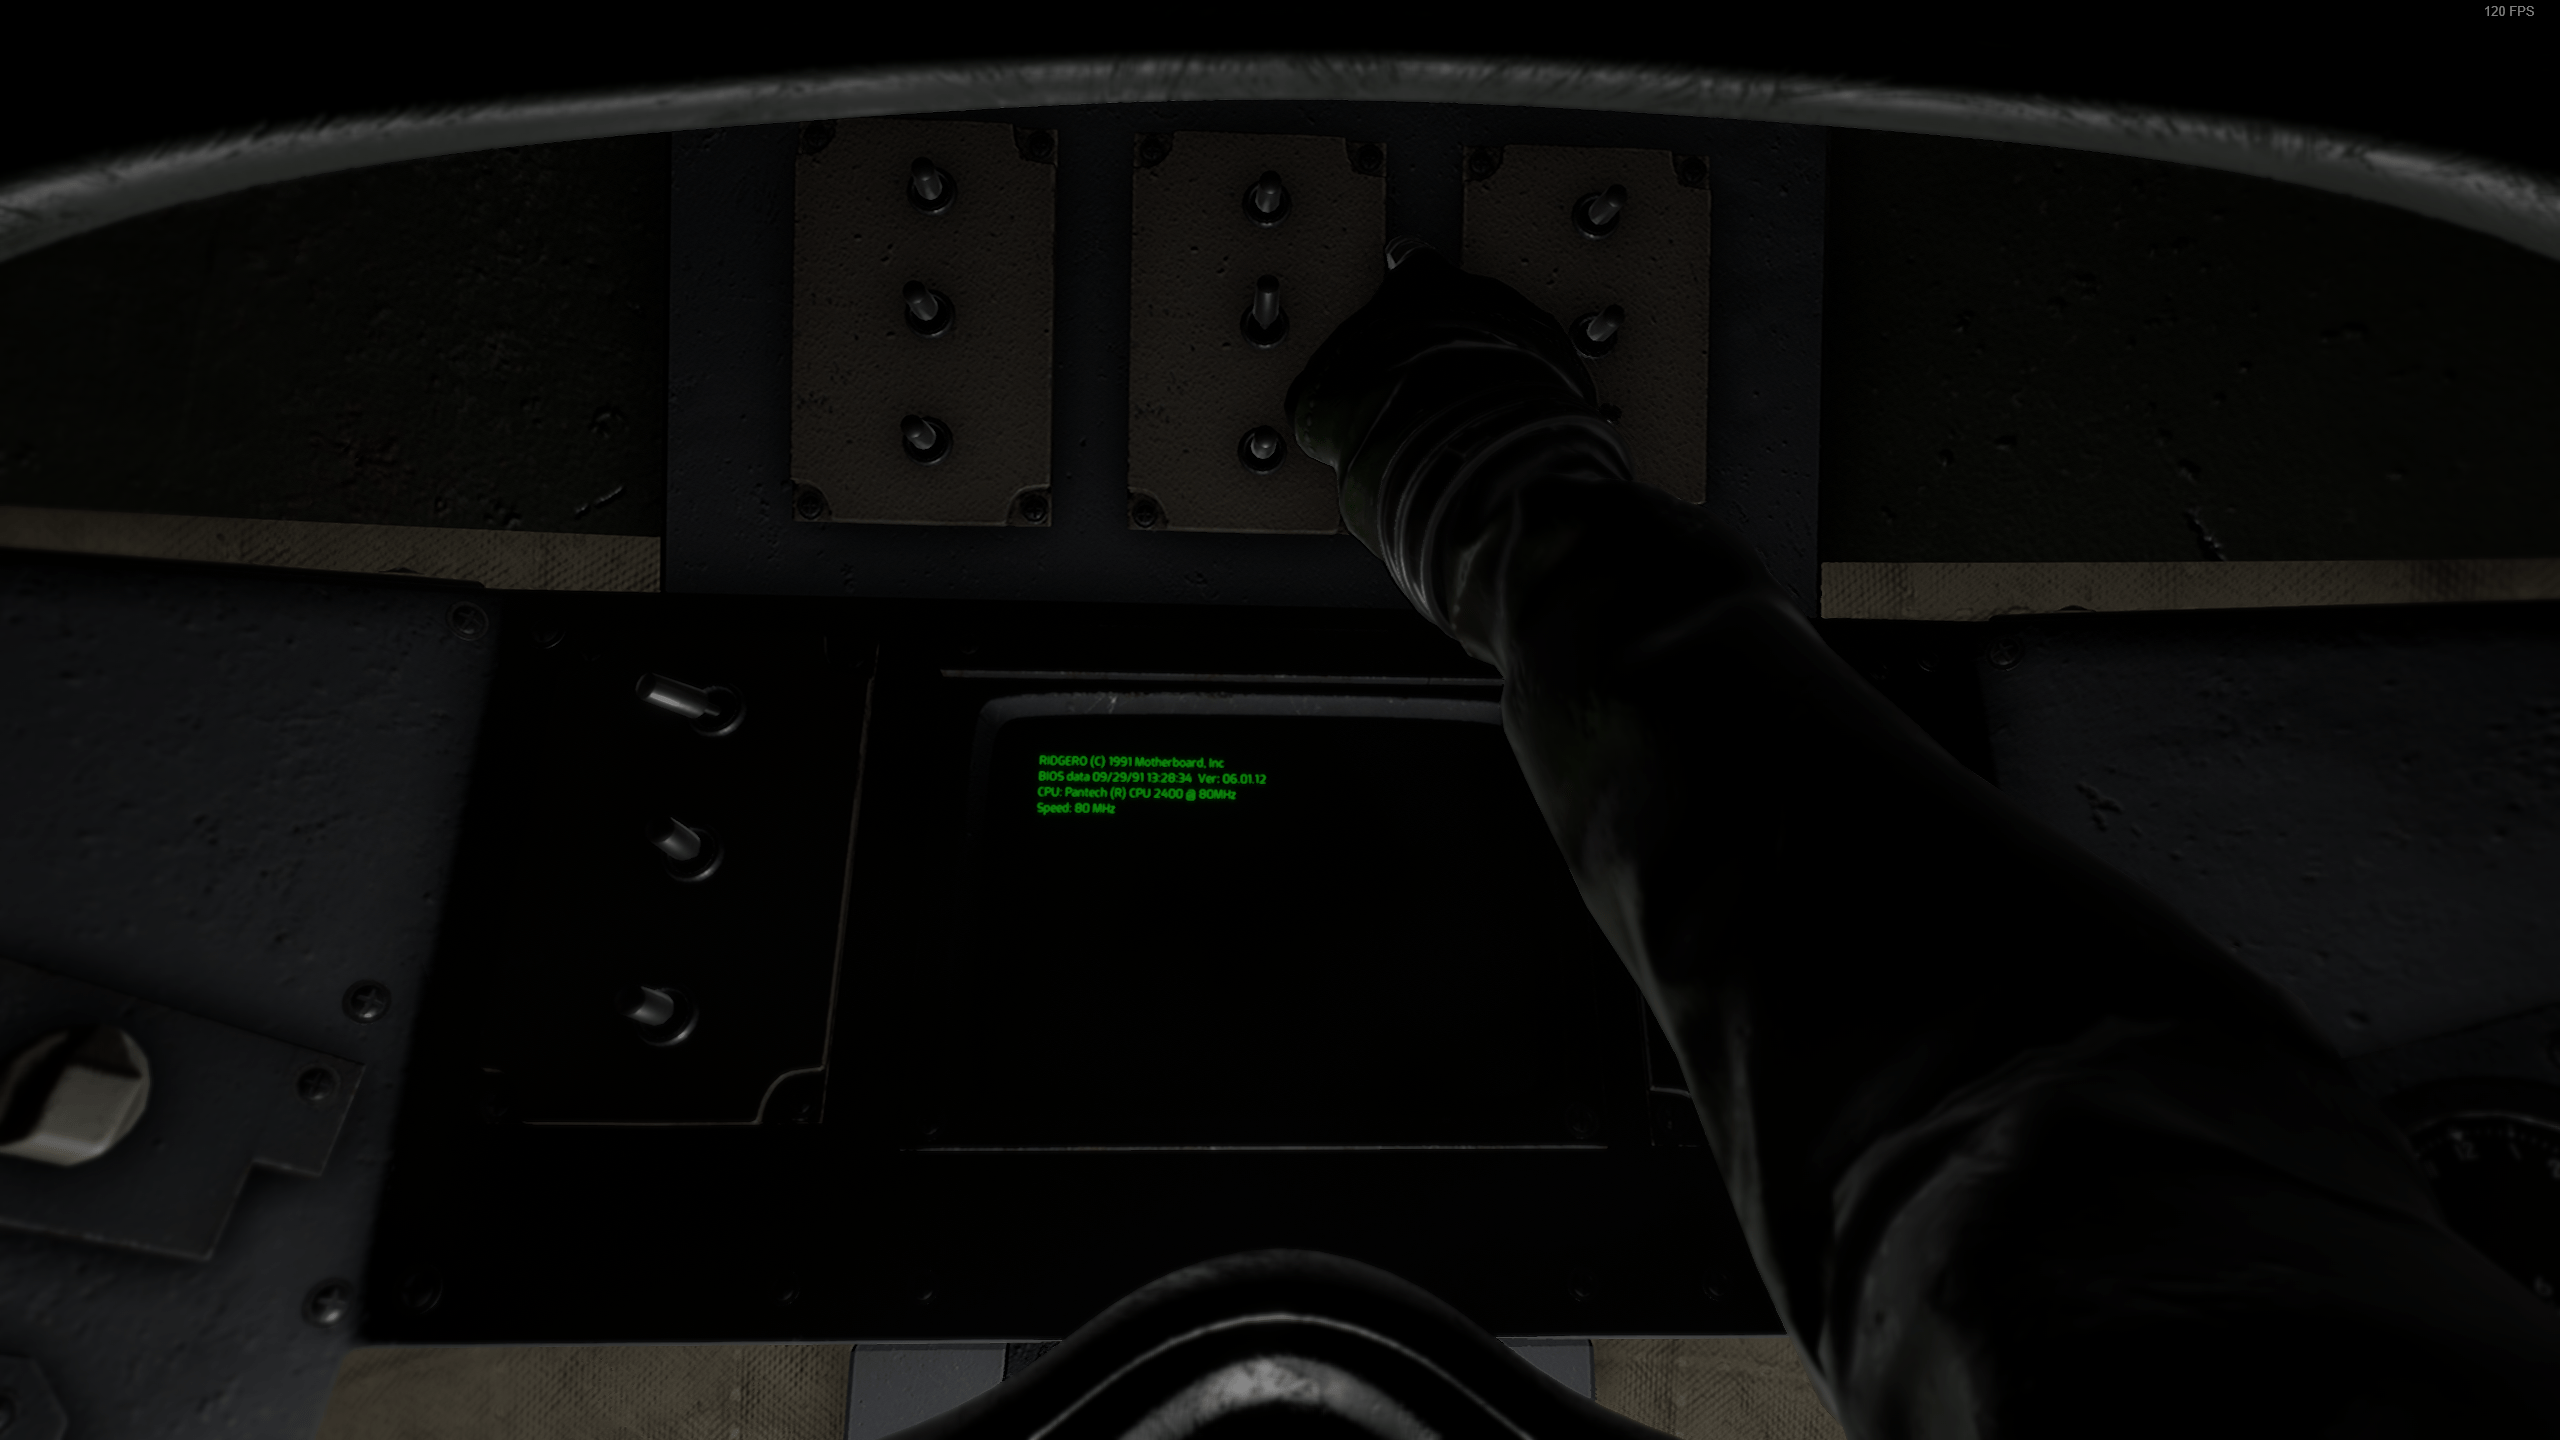 Old consoles with mechanical switches and the old screens with green text on them. Marauders beta impressions.